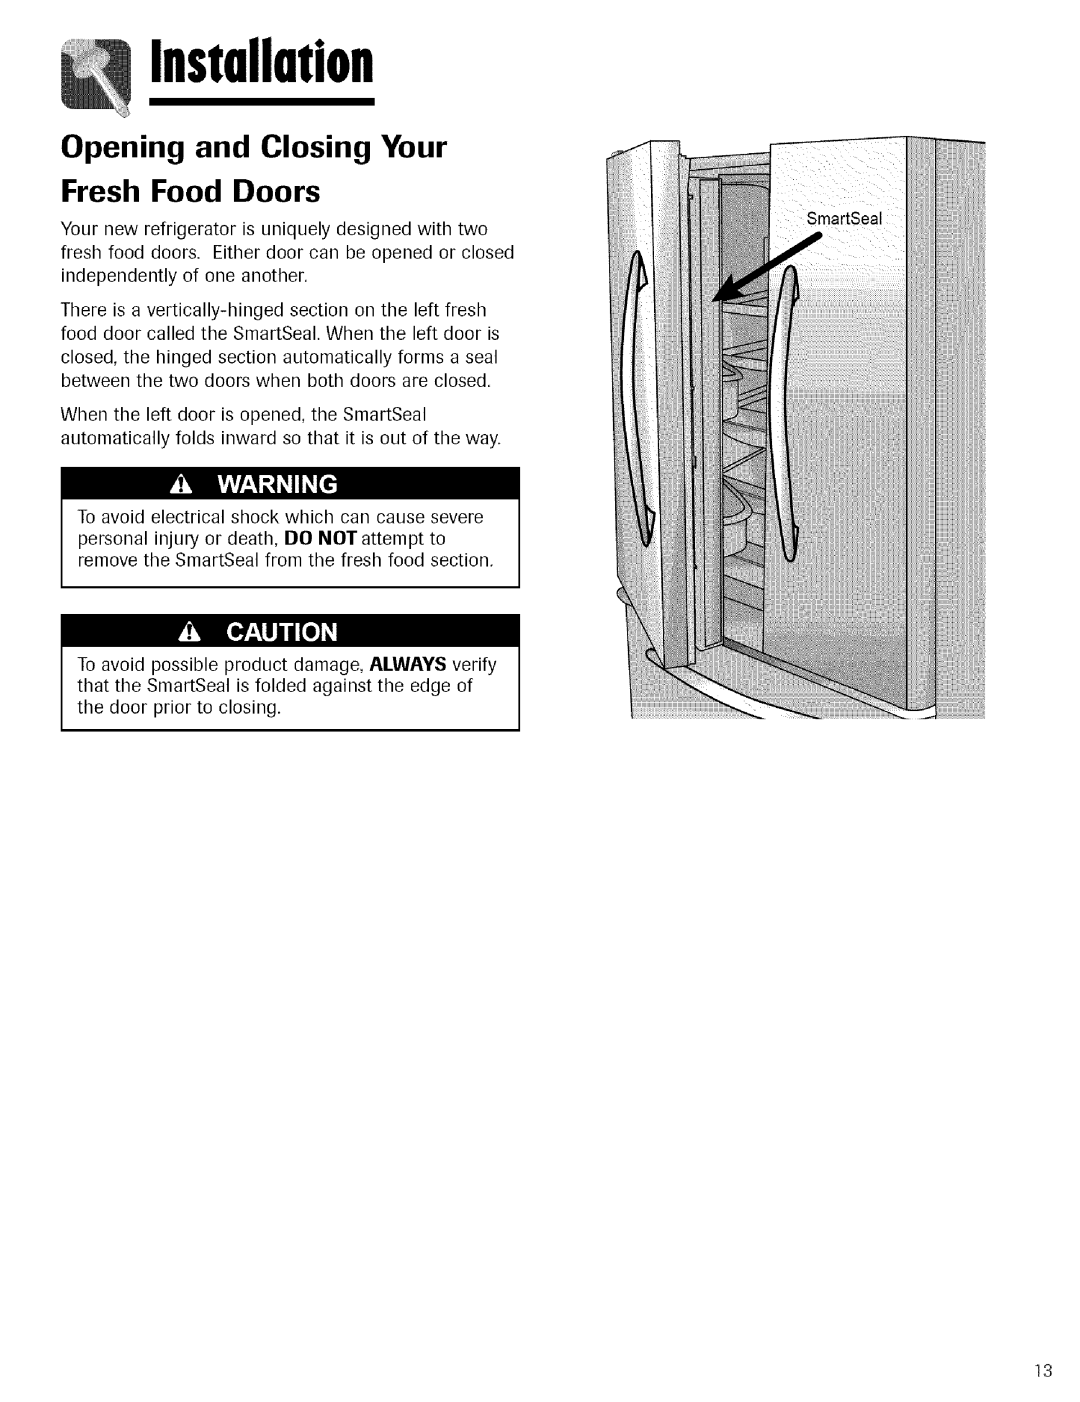 Kenmore 596.755024 manual Opening and Closing Your Fresh Food Doors, Installation 